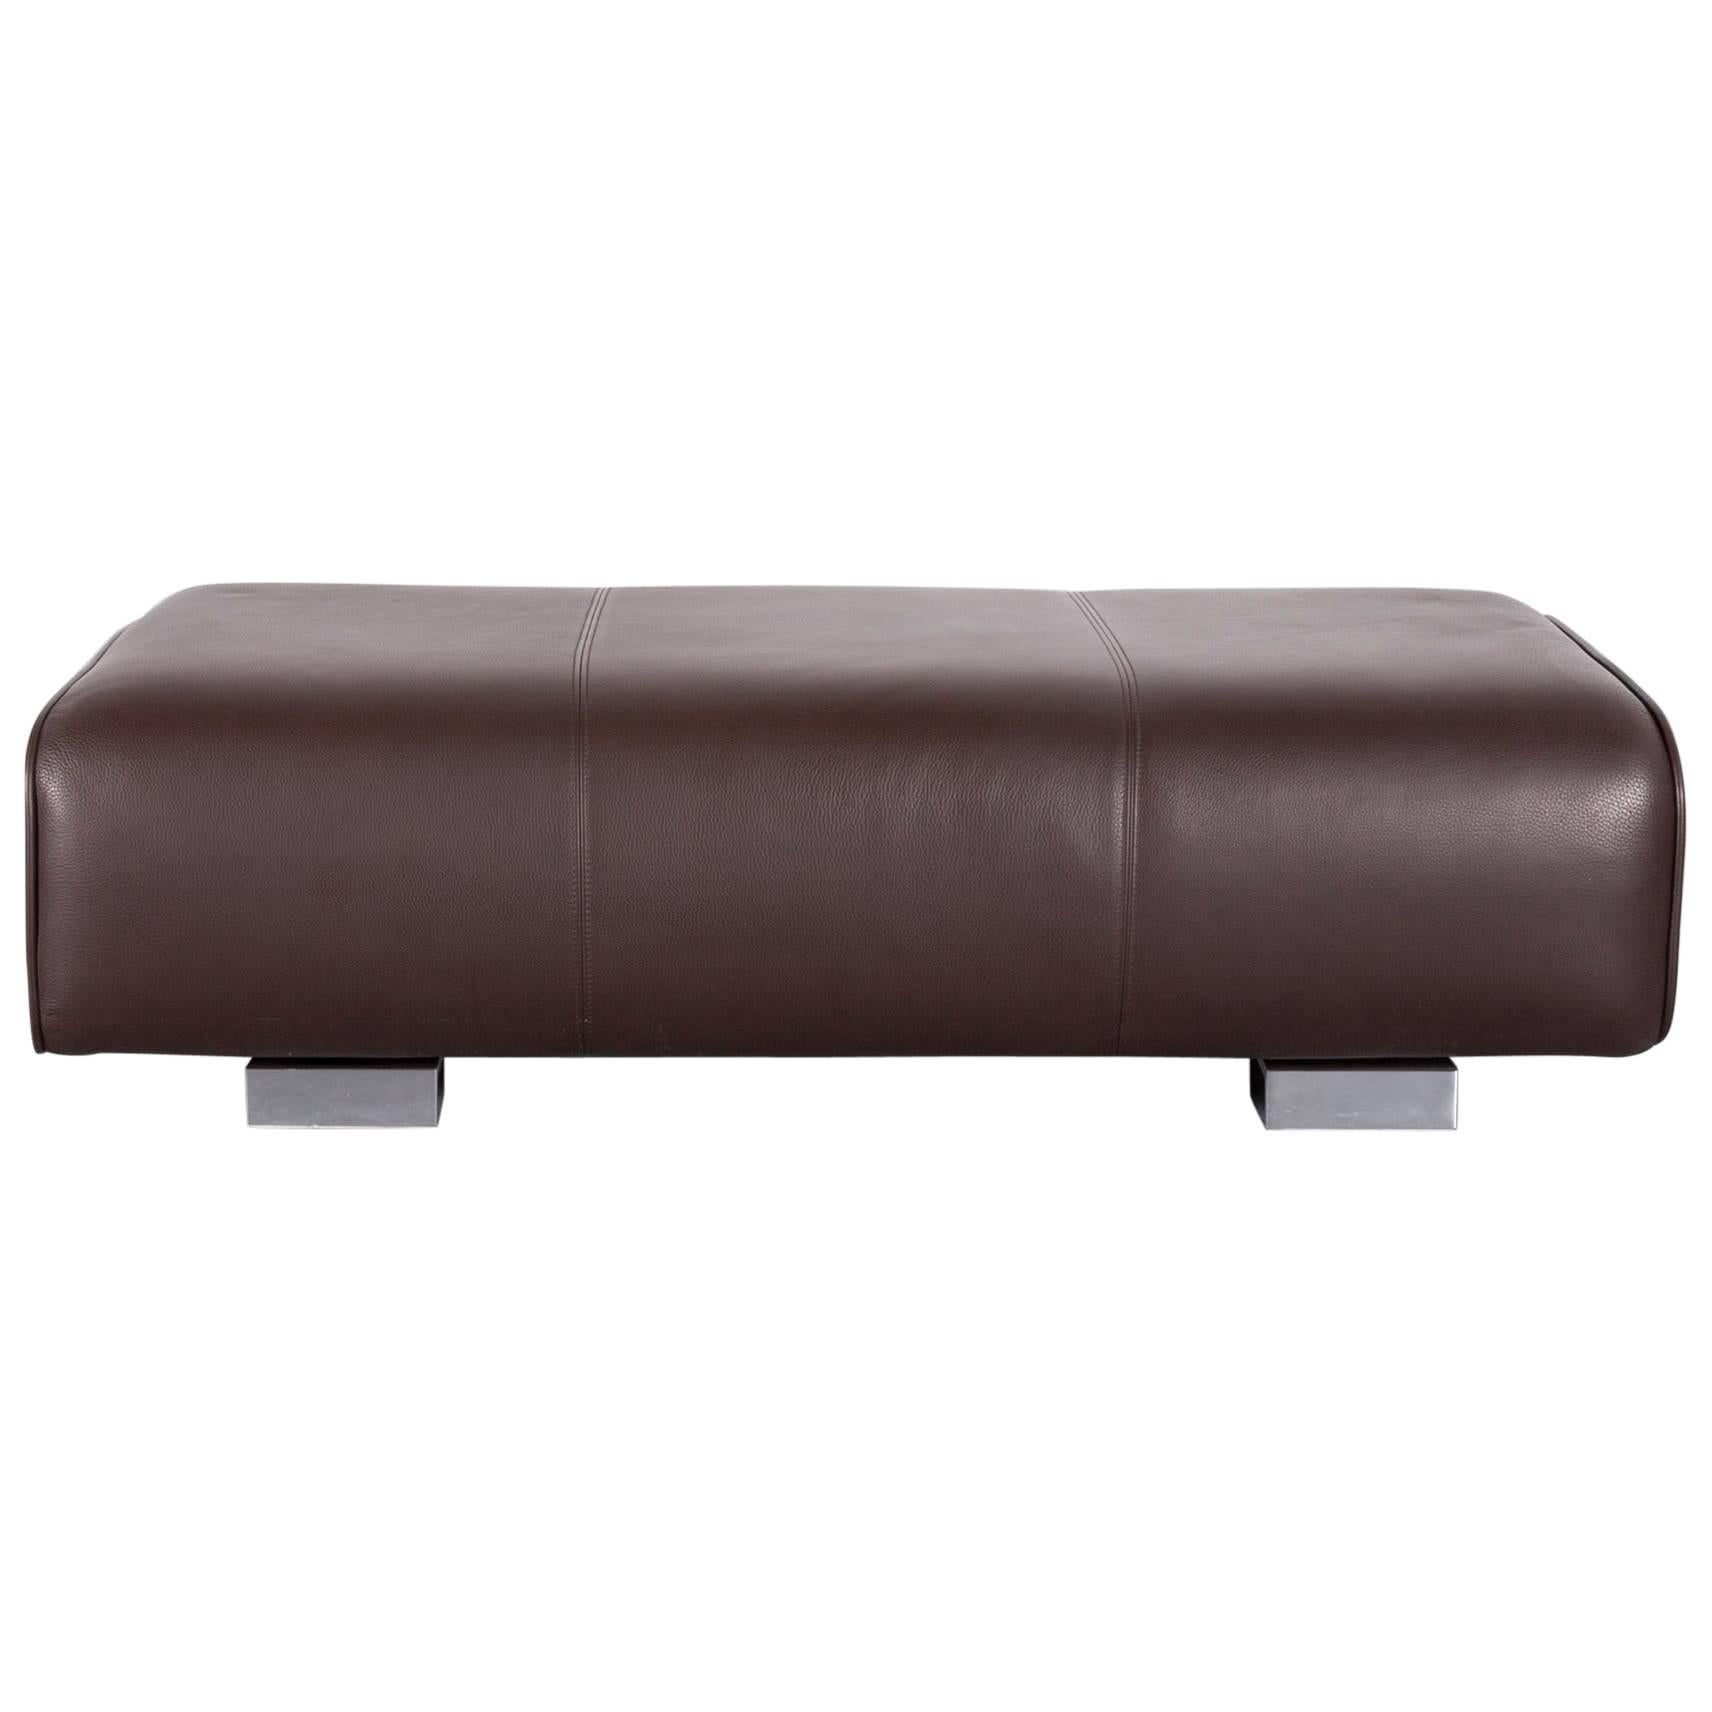 Rolf Benz 6300 Leather Foot-Stool Brown Bench